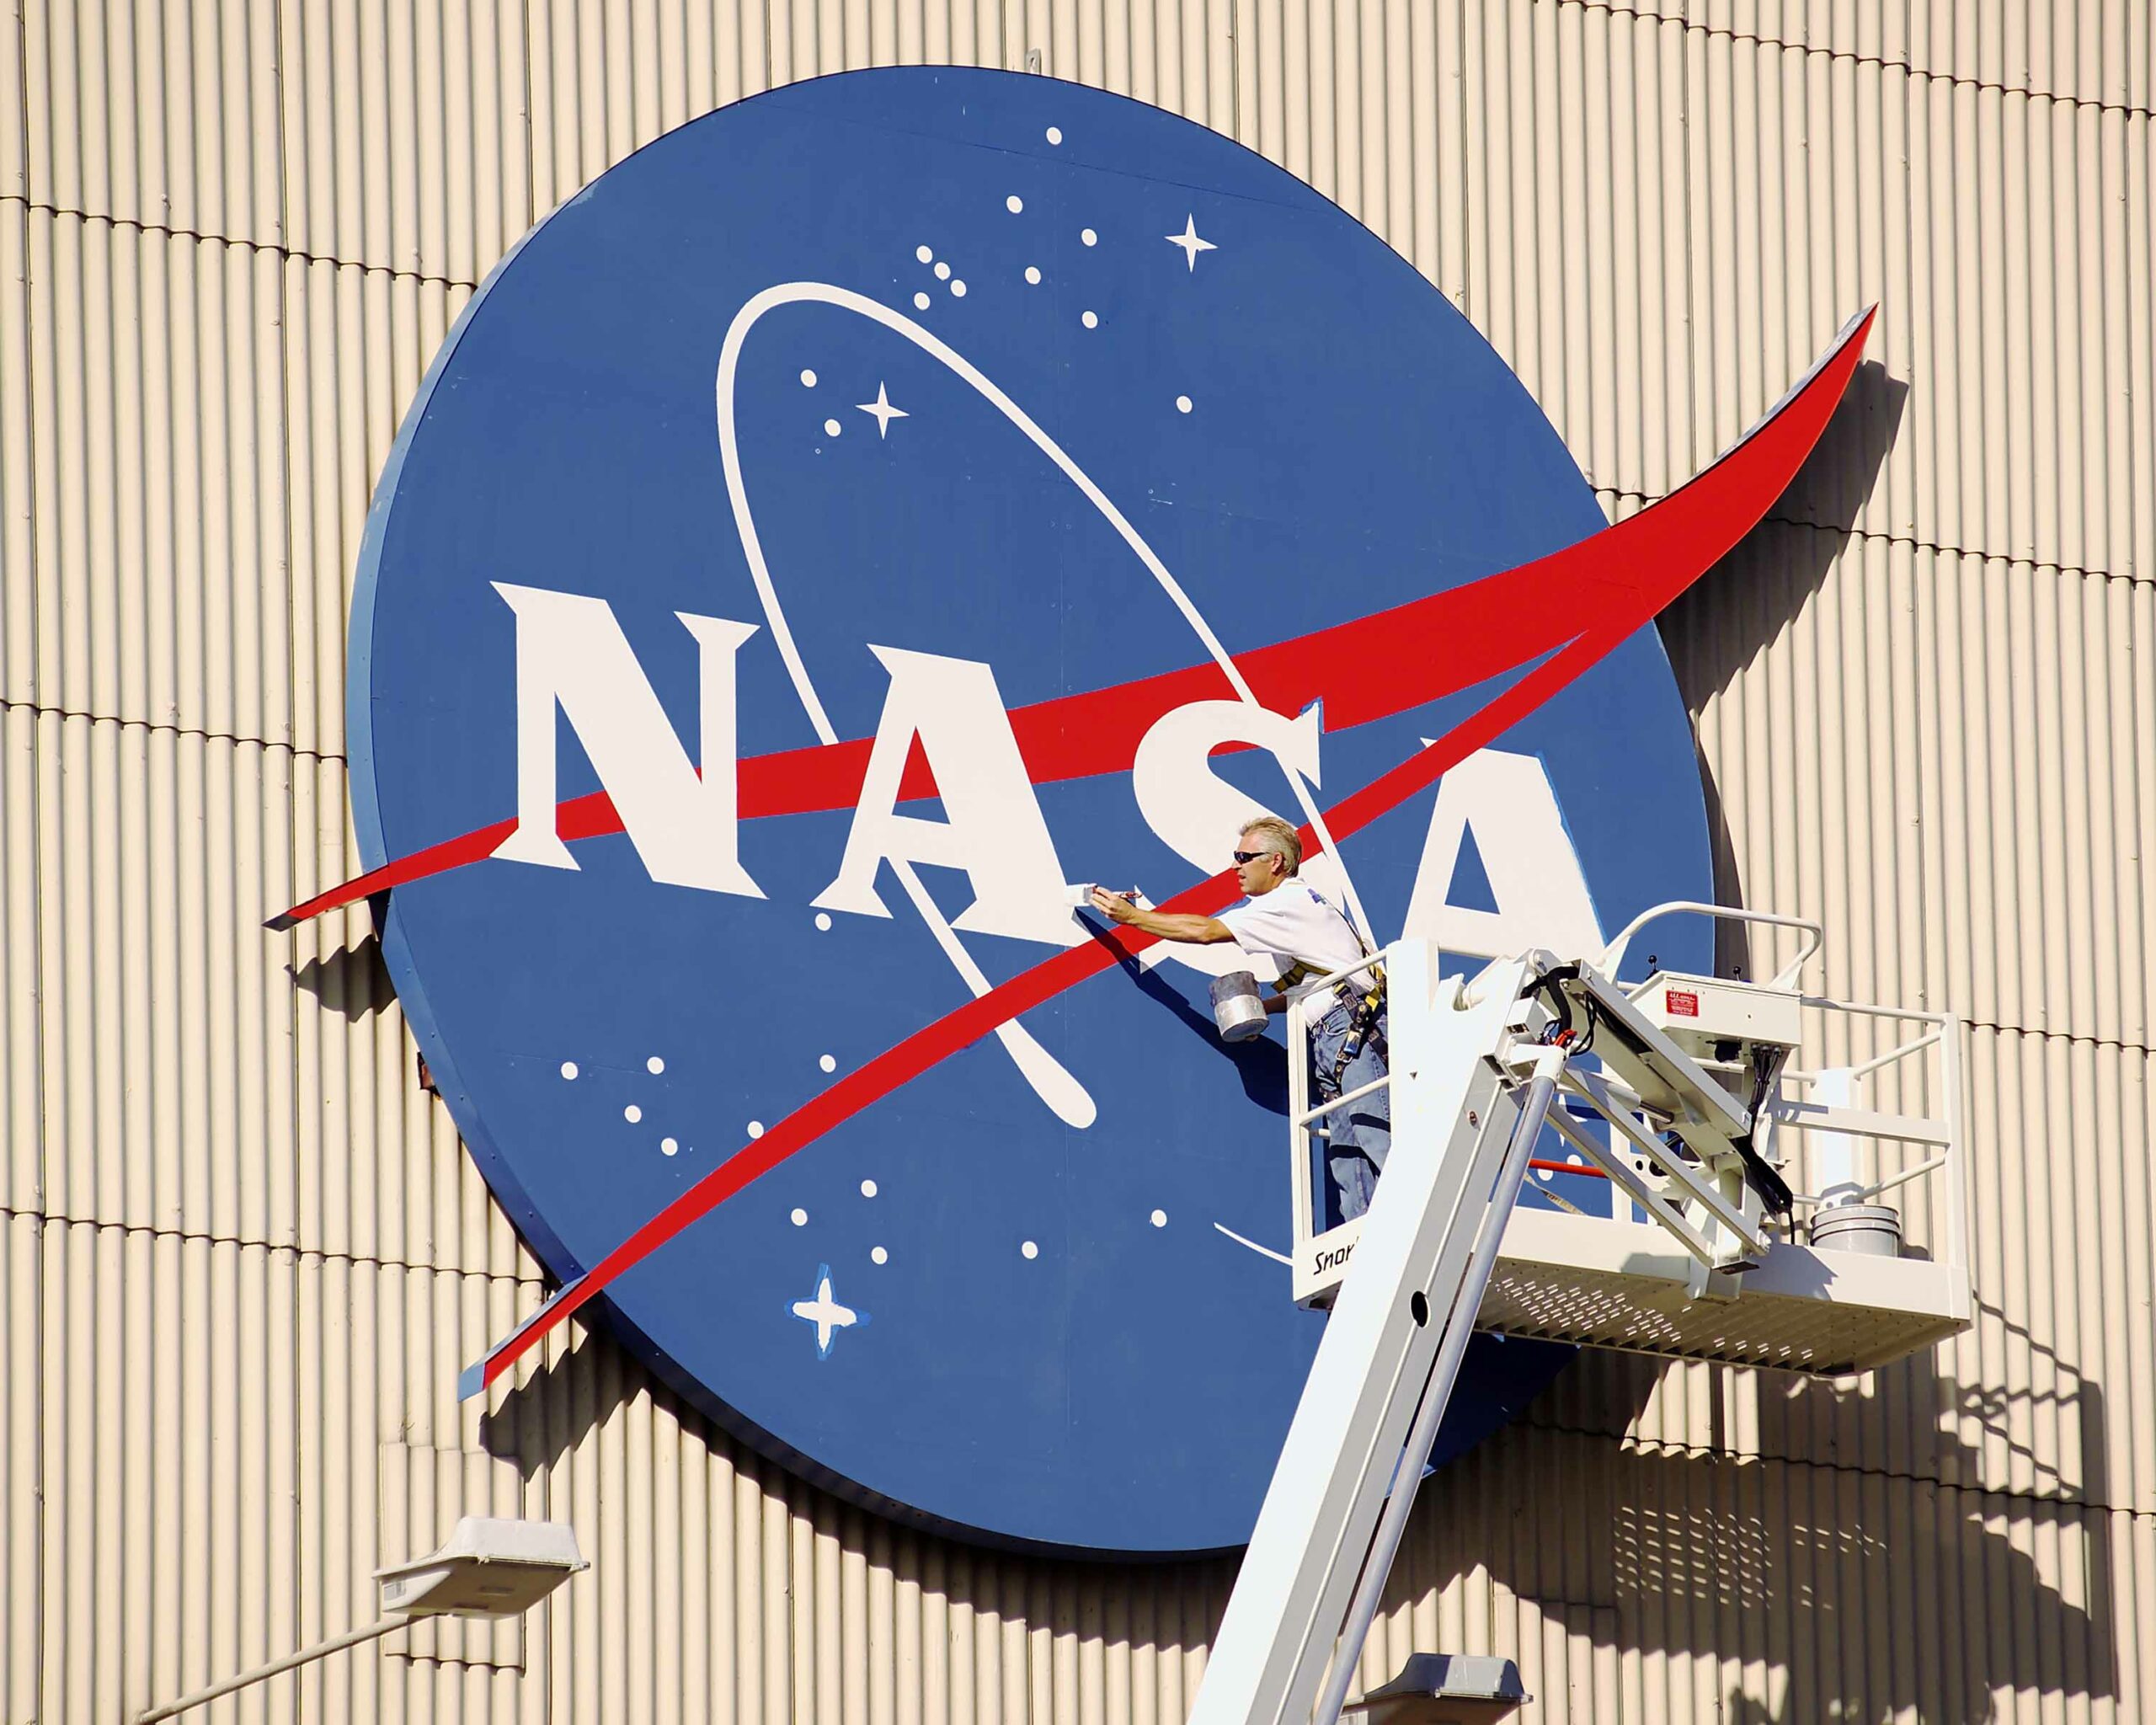 NASA to launch new mission for weather observation, environmental monitoring